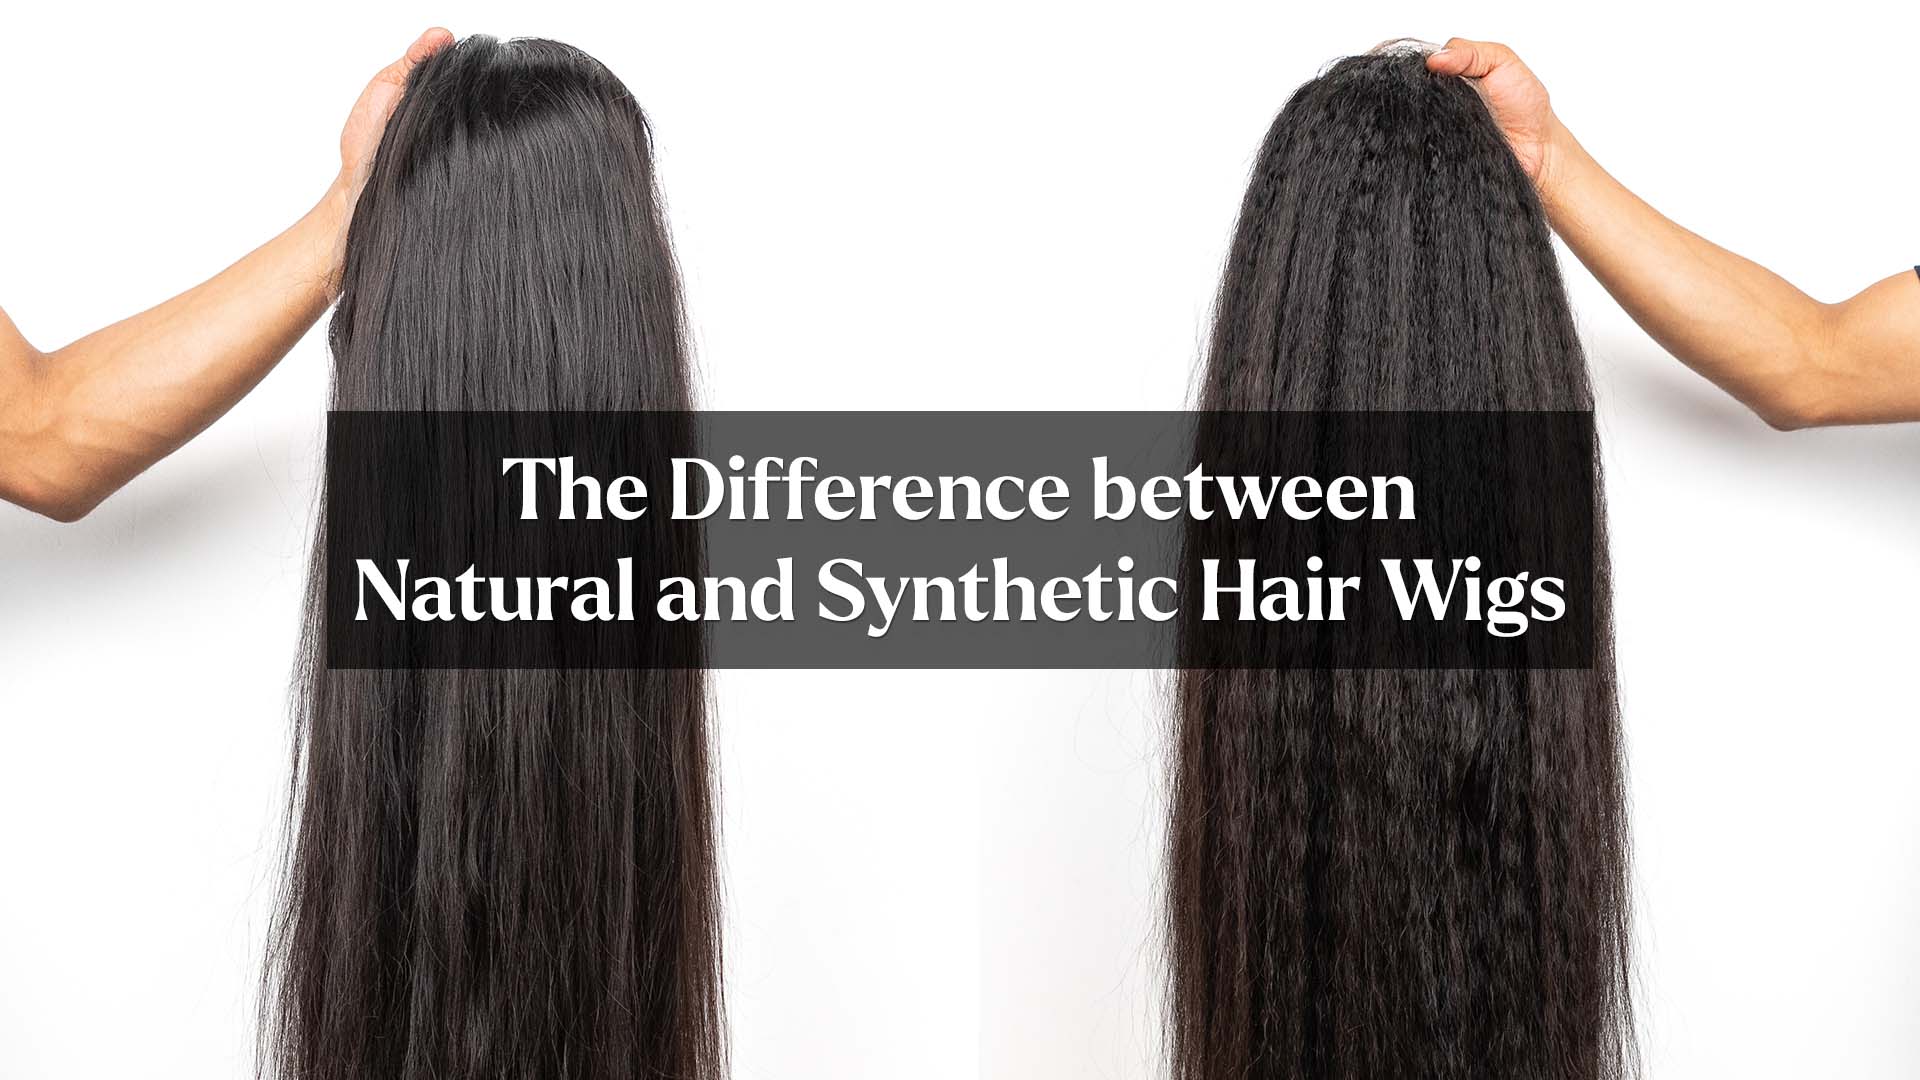 The Difference between Natural and Synthetic Hair Wigs.